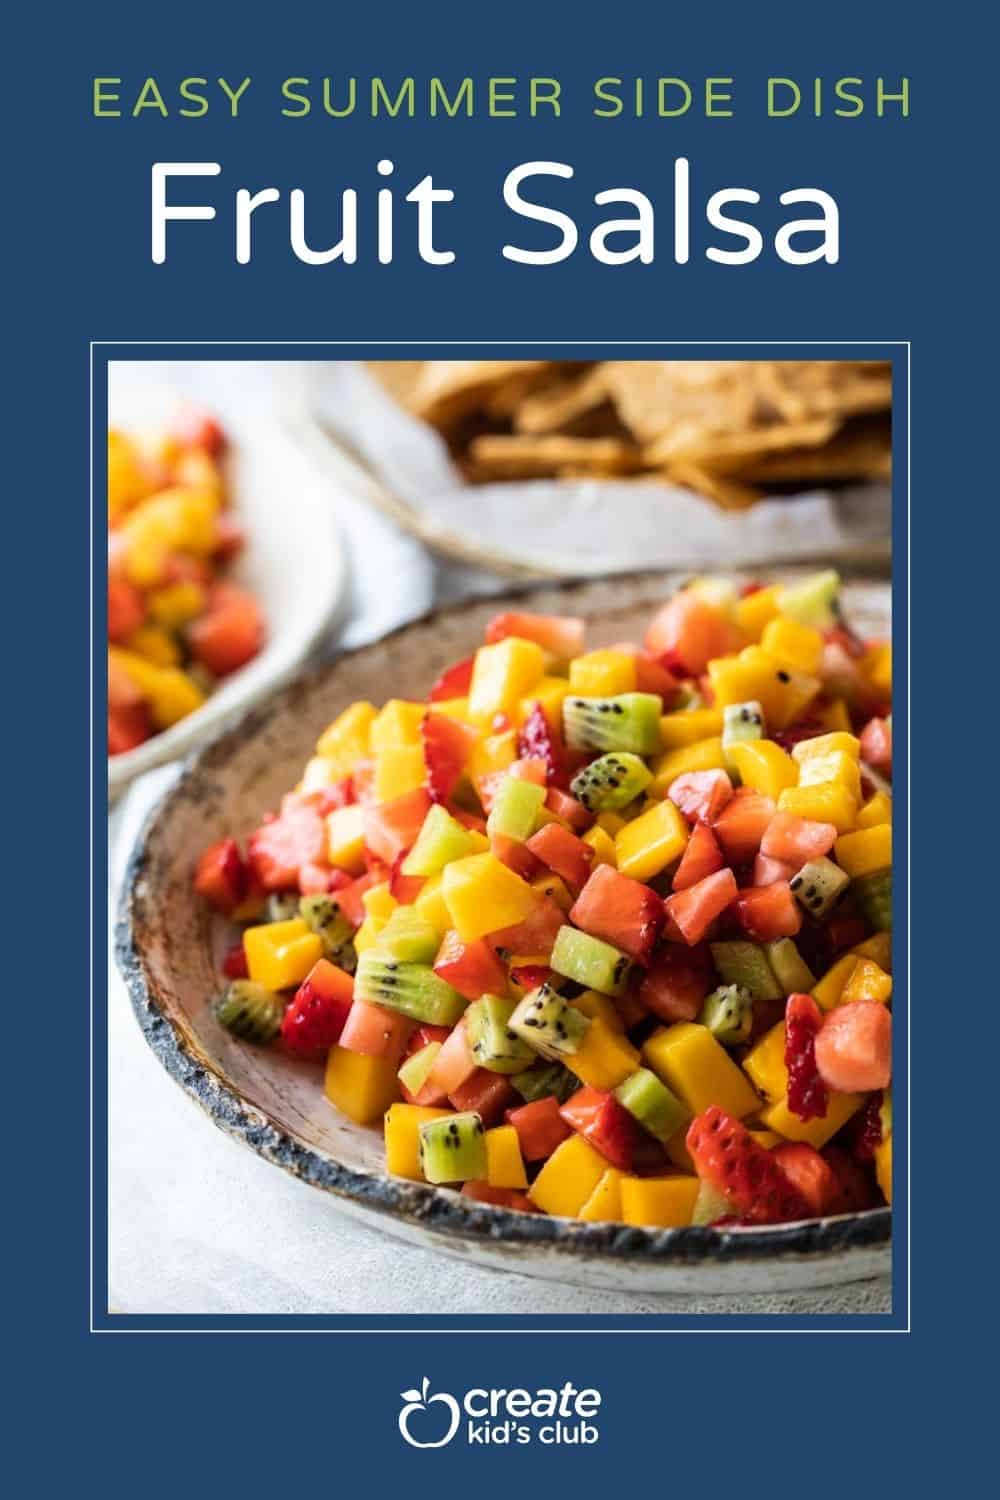 pin of fruit salsa in a bowl